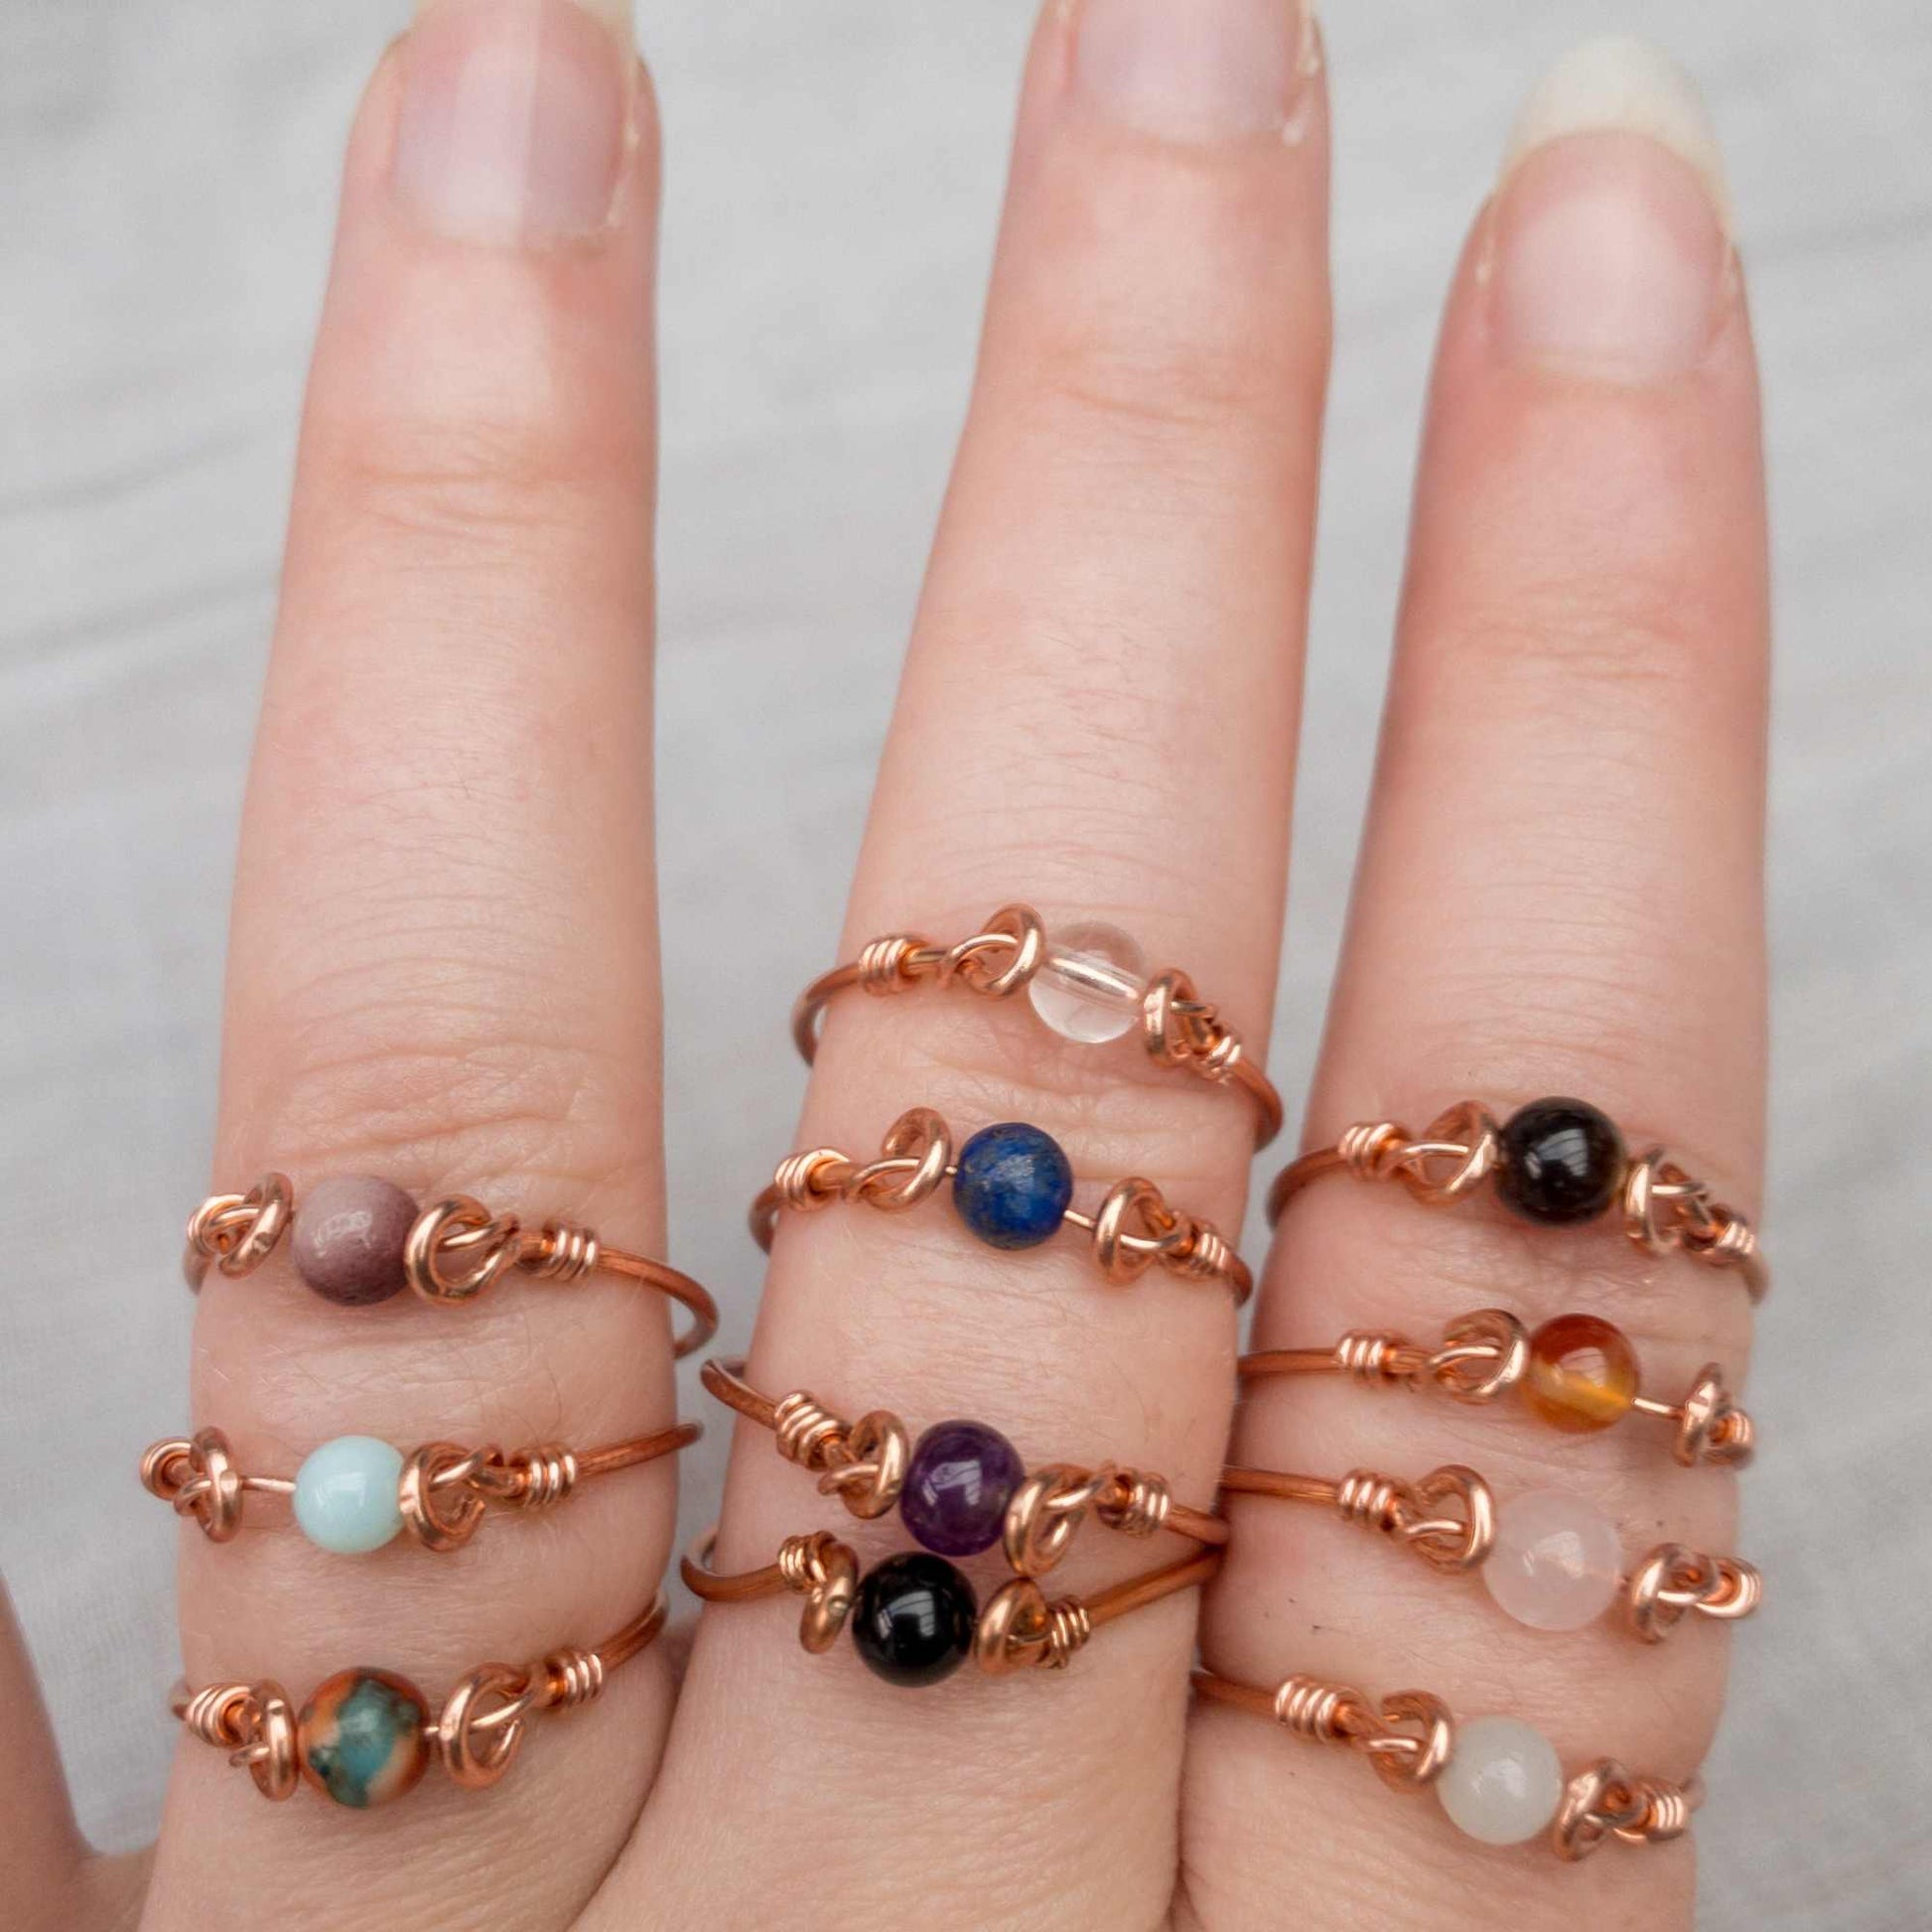 hand showing rings in different crystals